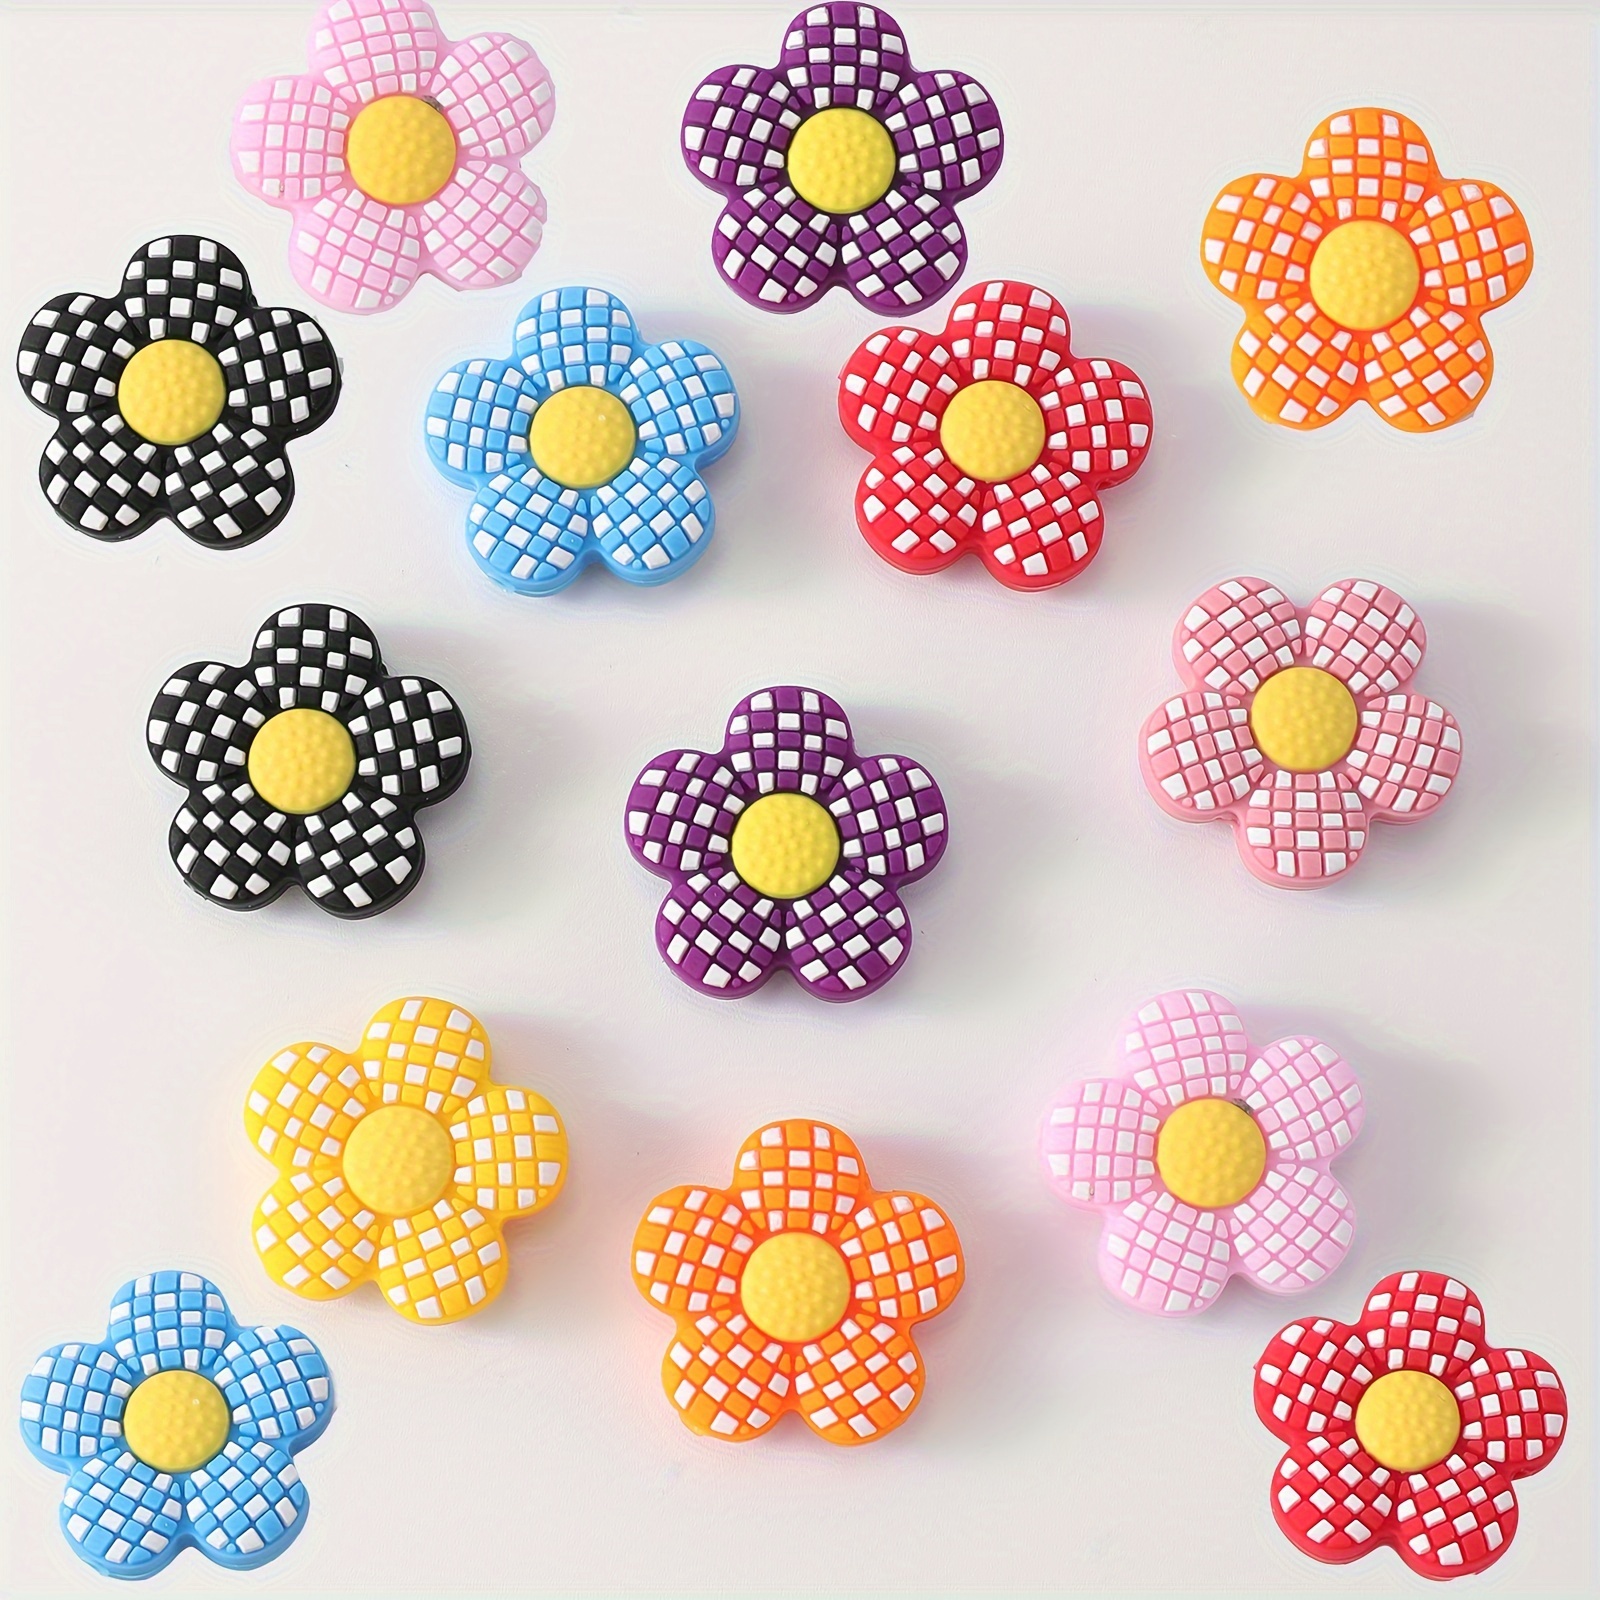 

18pcs Flower Theme Silicone Bulk Beads For Jewelry Making Diy Creative Key Bag Chain Character Pens Decors Bracelet Necklace Craft Supplies